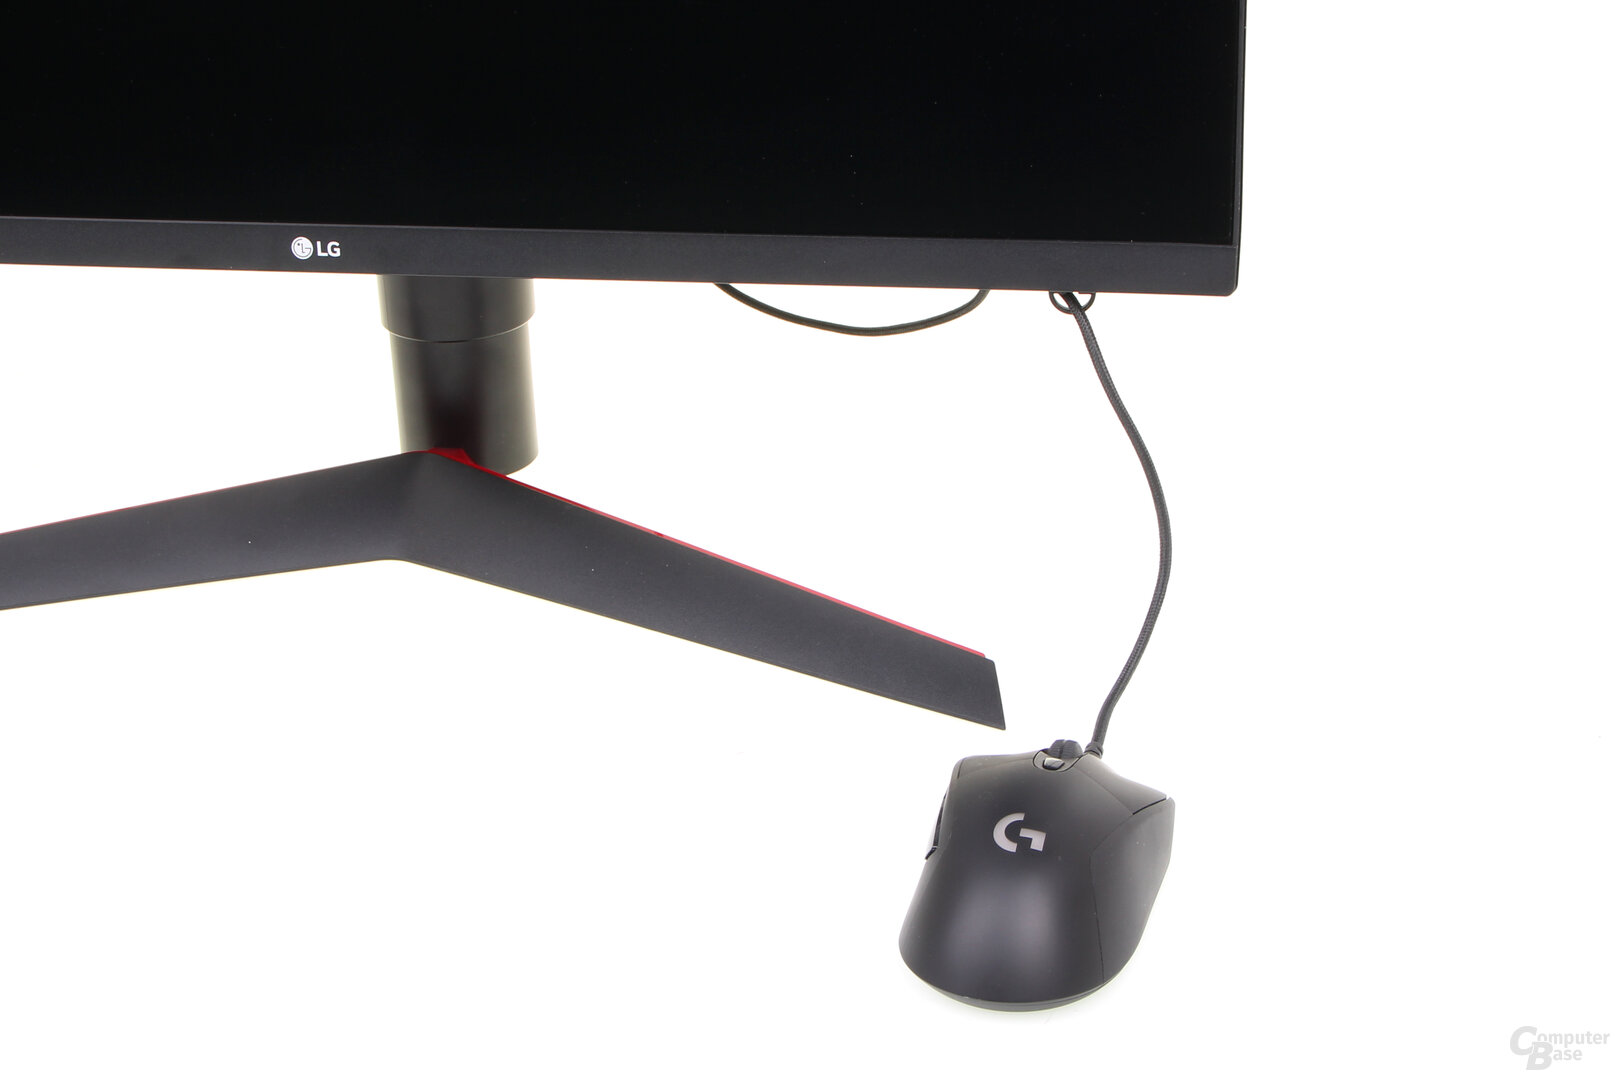 LG 27GL850-B mit Mouse-Bungee